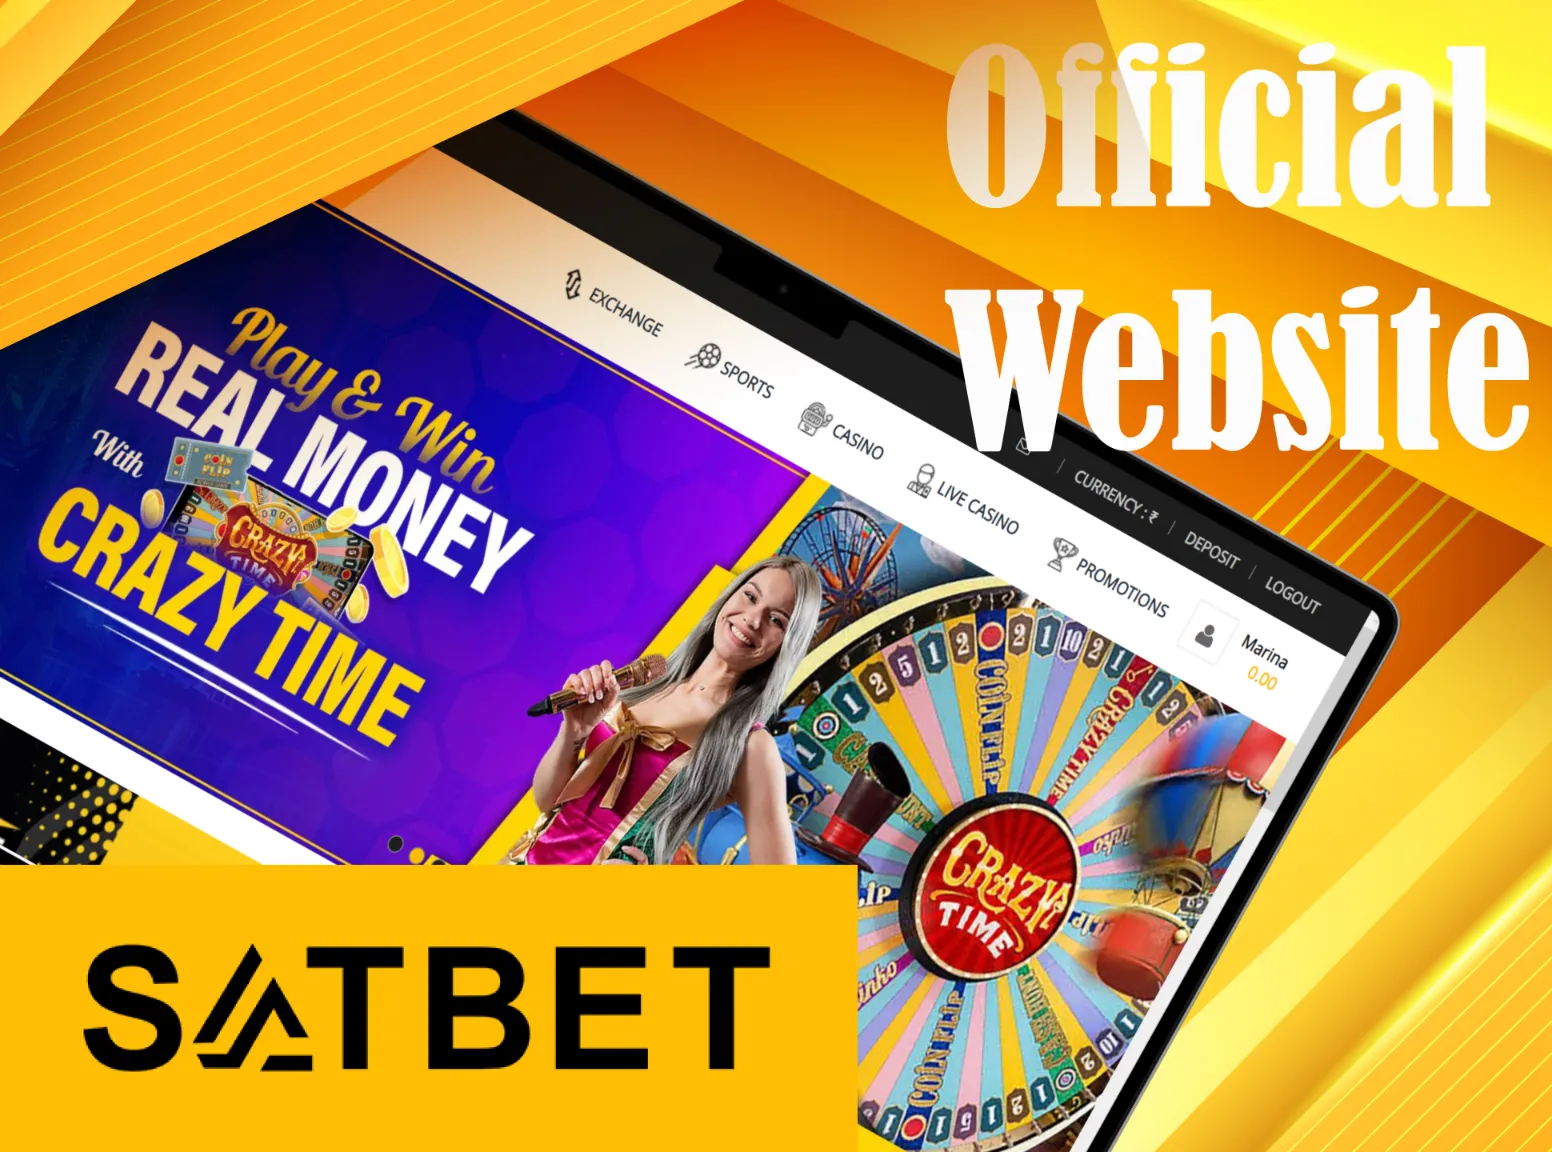 Visit Satbet official website from any device.